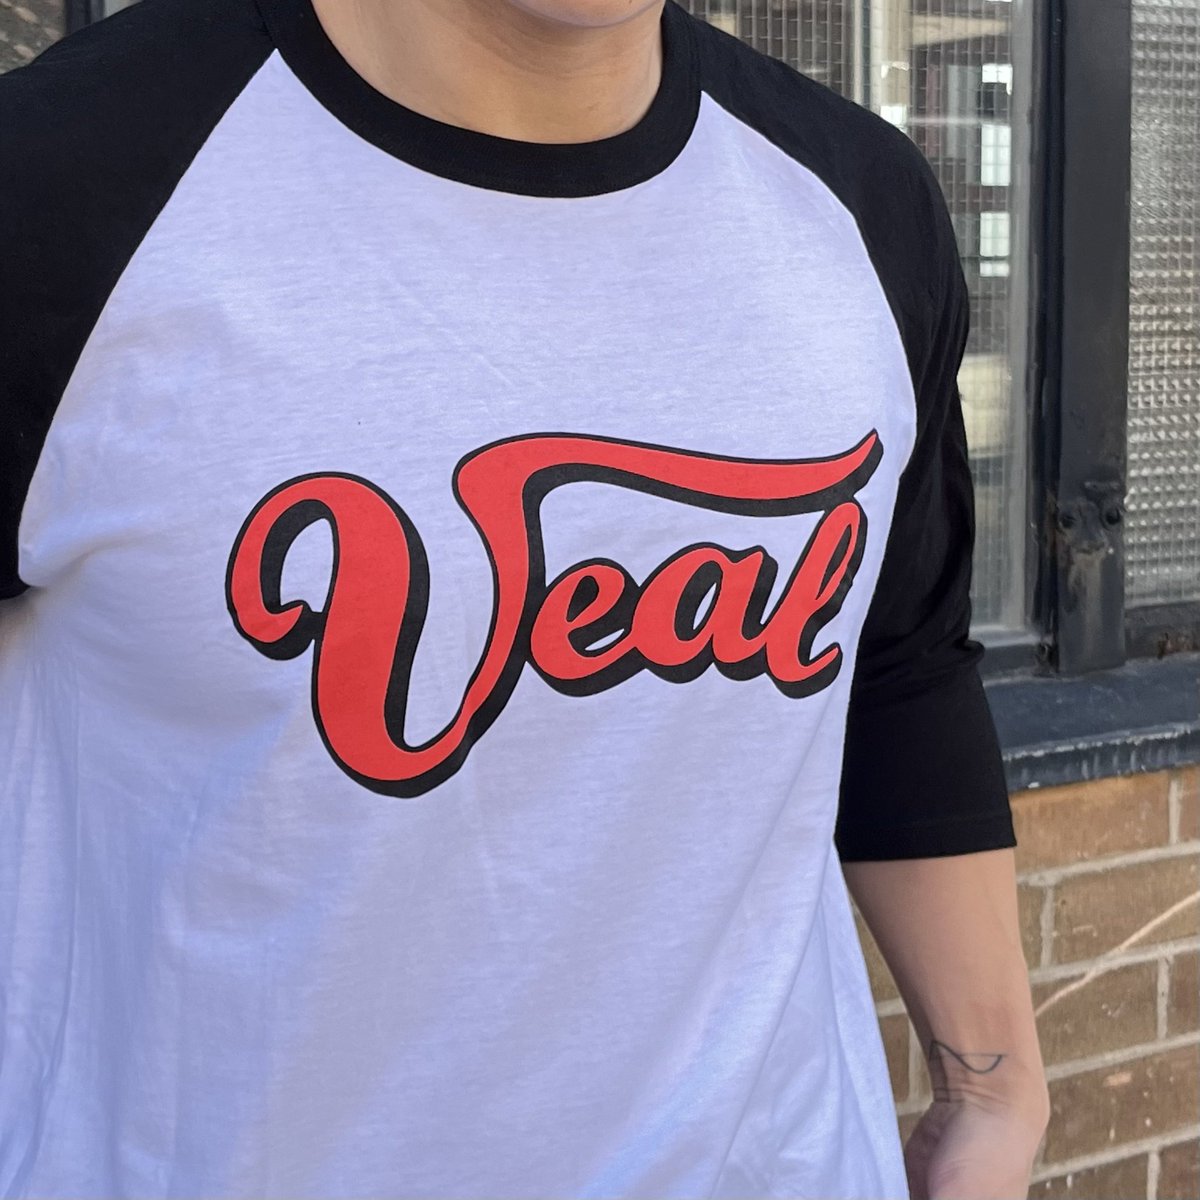 These new Veal shirts are every bit the ’90s classics we remembered. Grab yours at Veal’s first show tonight at Dive Bar in Waterloo or at their gigs in Ottawa, Hamilton and Toronto. Tickets on sale via sixshooterrecords.lnk.to/vealtourTW 🌟